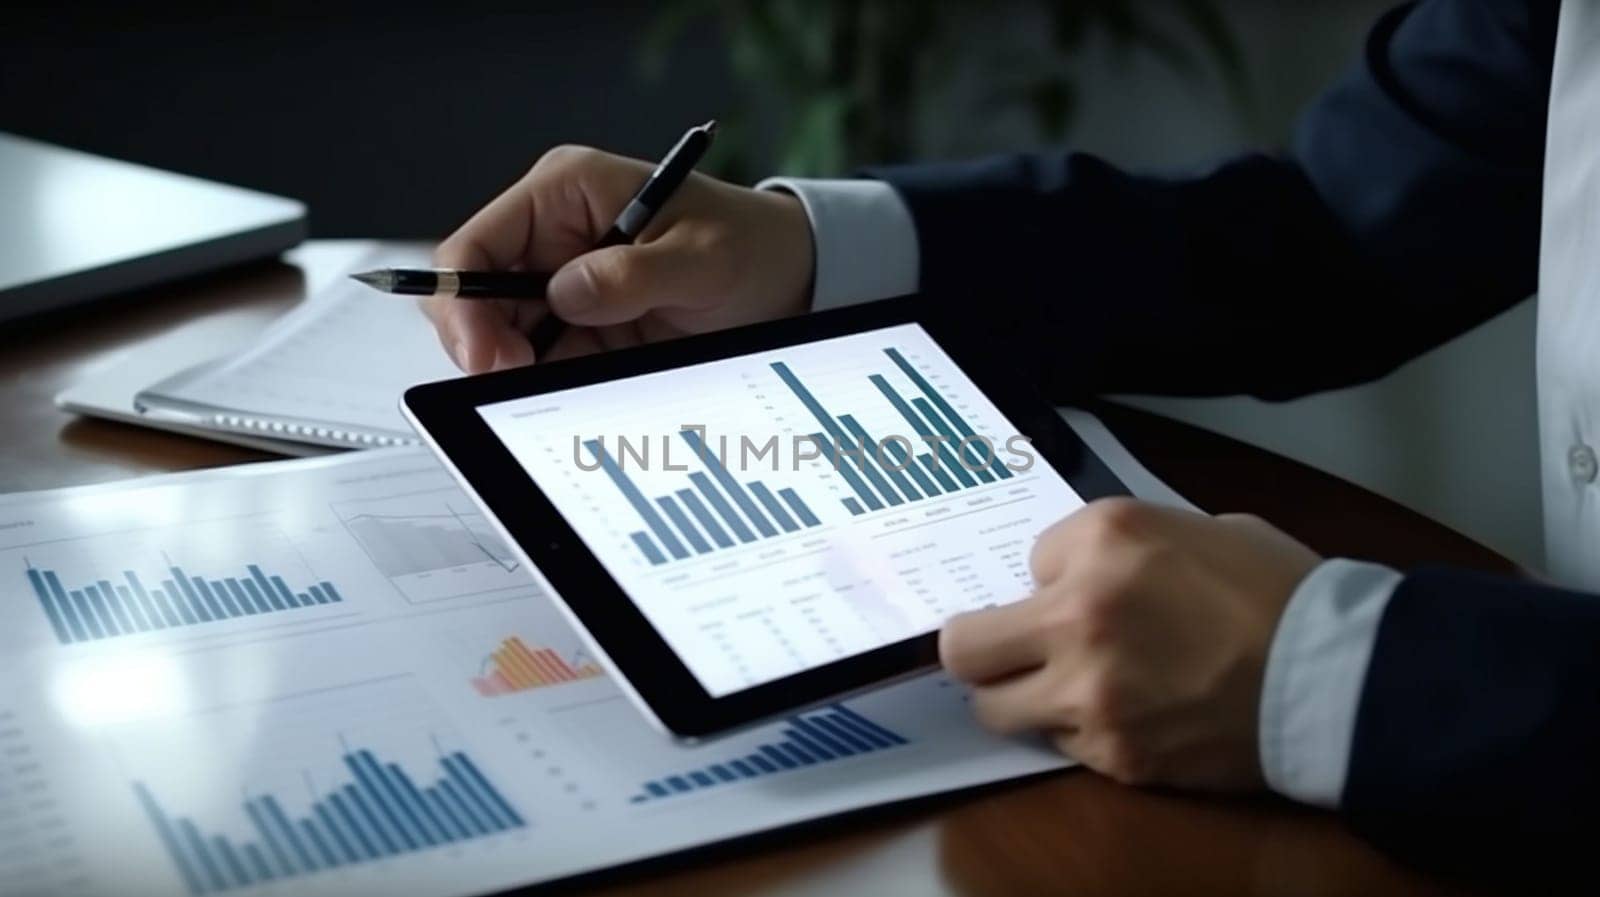 Financial businessmen analyze the graph of the company's performance to create profits and growth. Home finances, investment, economy, saving money or insurance concept. bookkeeper or financial inspector hands calculate making a report, calculating or checking balance. by Costin